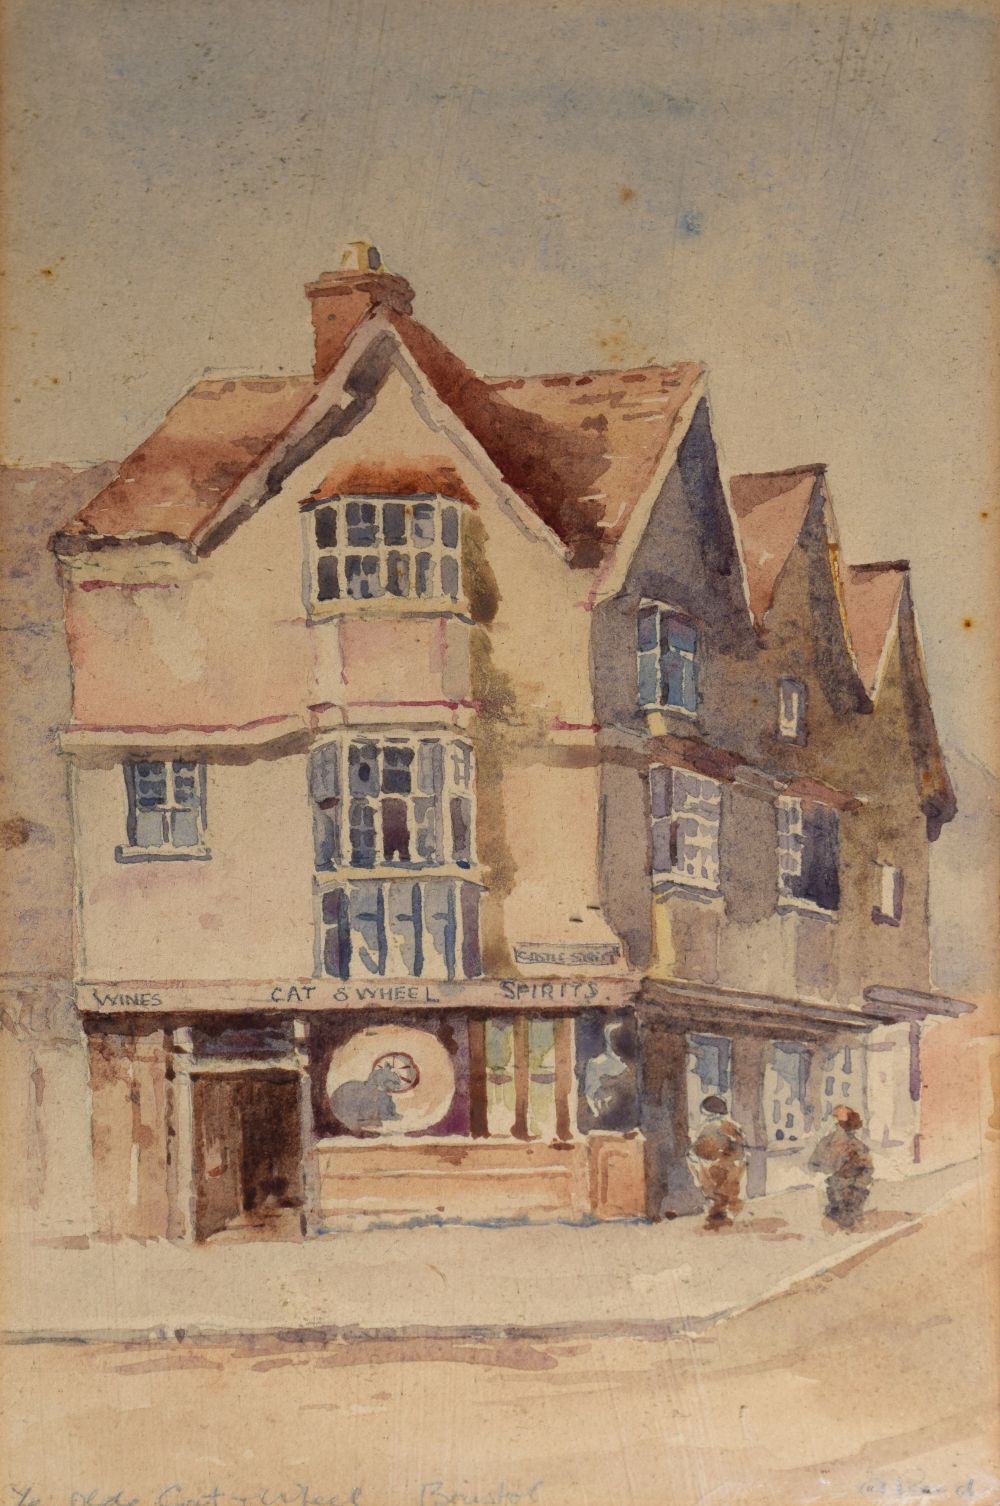 A.Reid - Watercolour - 'Ye Olde Cat and Wheel, Bristol', signed lower right, 21.5cm x 12cm, framed